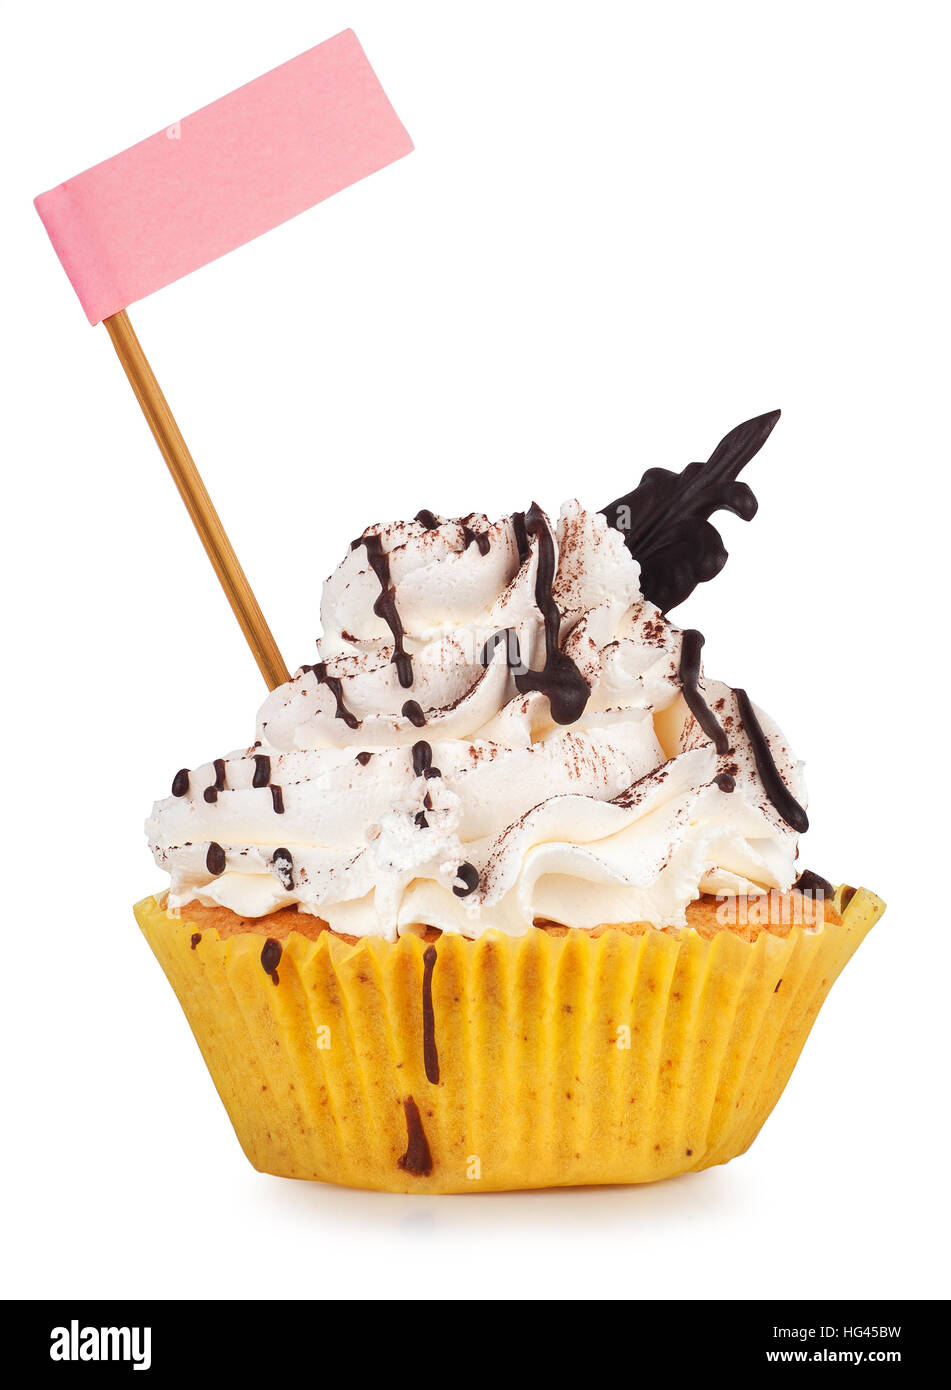 Cupcake with chocolate drizzle and pink flag with place for text isolated on white background Stock Photo